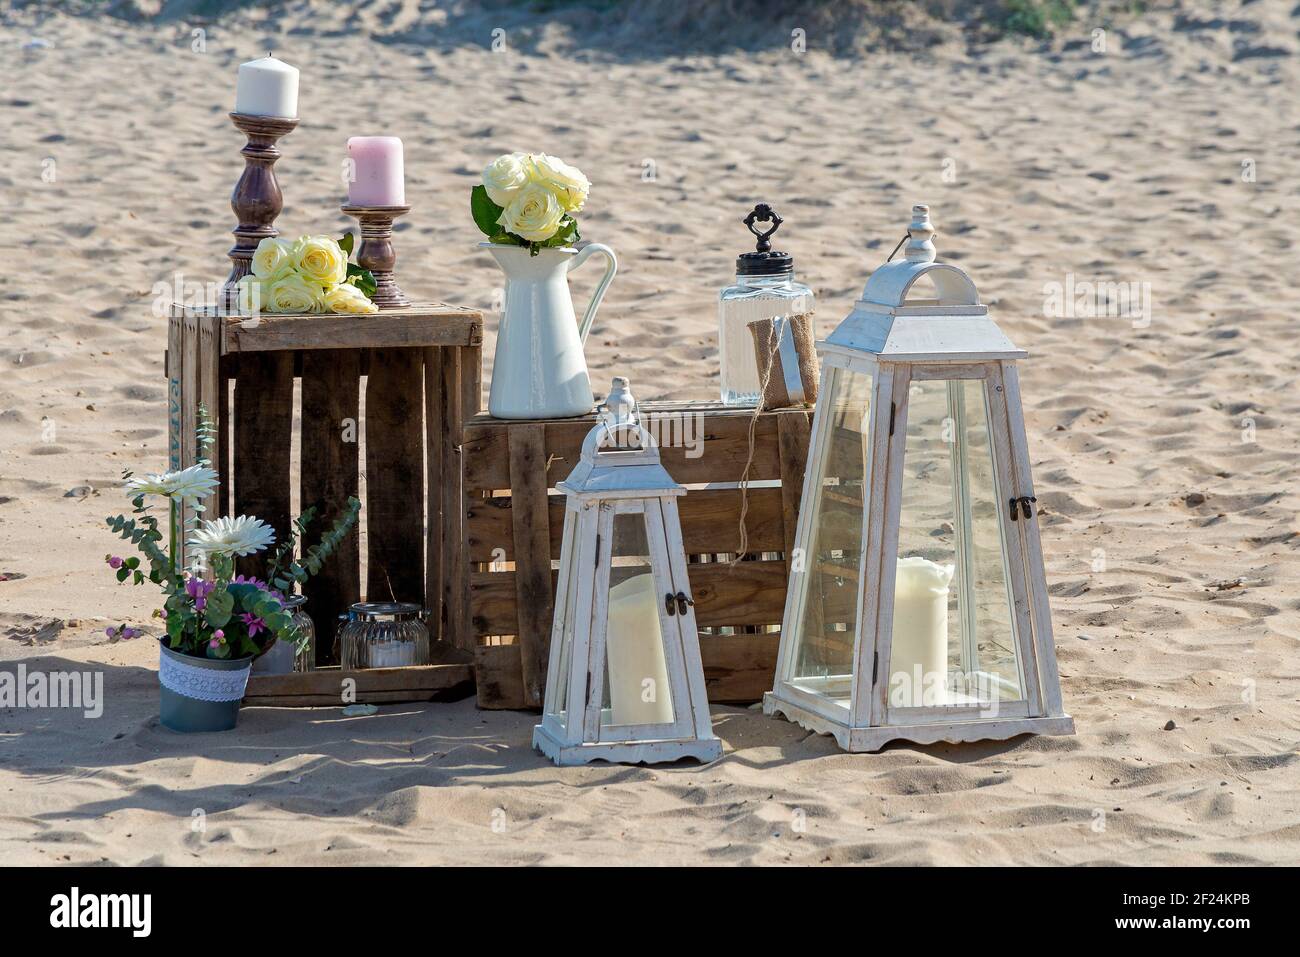 Beautiful decorations of the wedding set on the sand of the beach